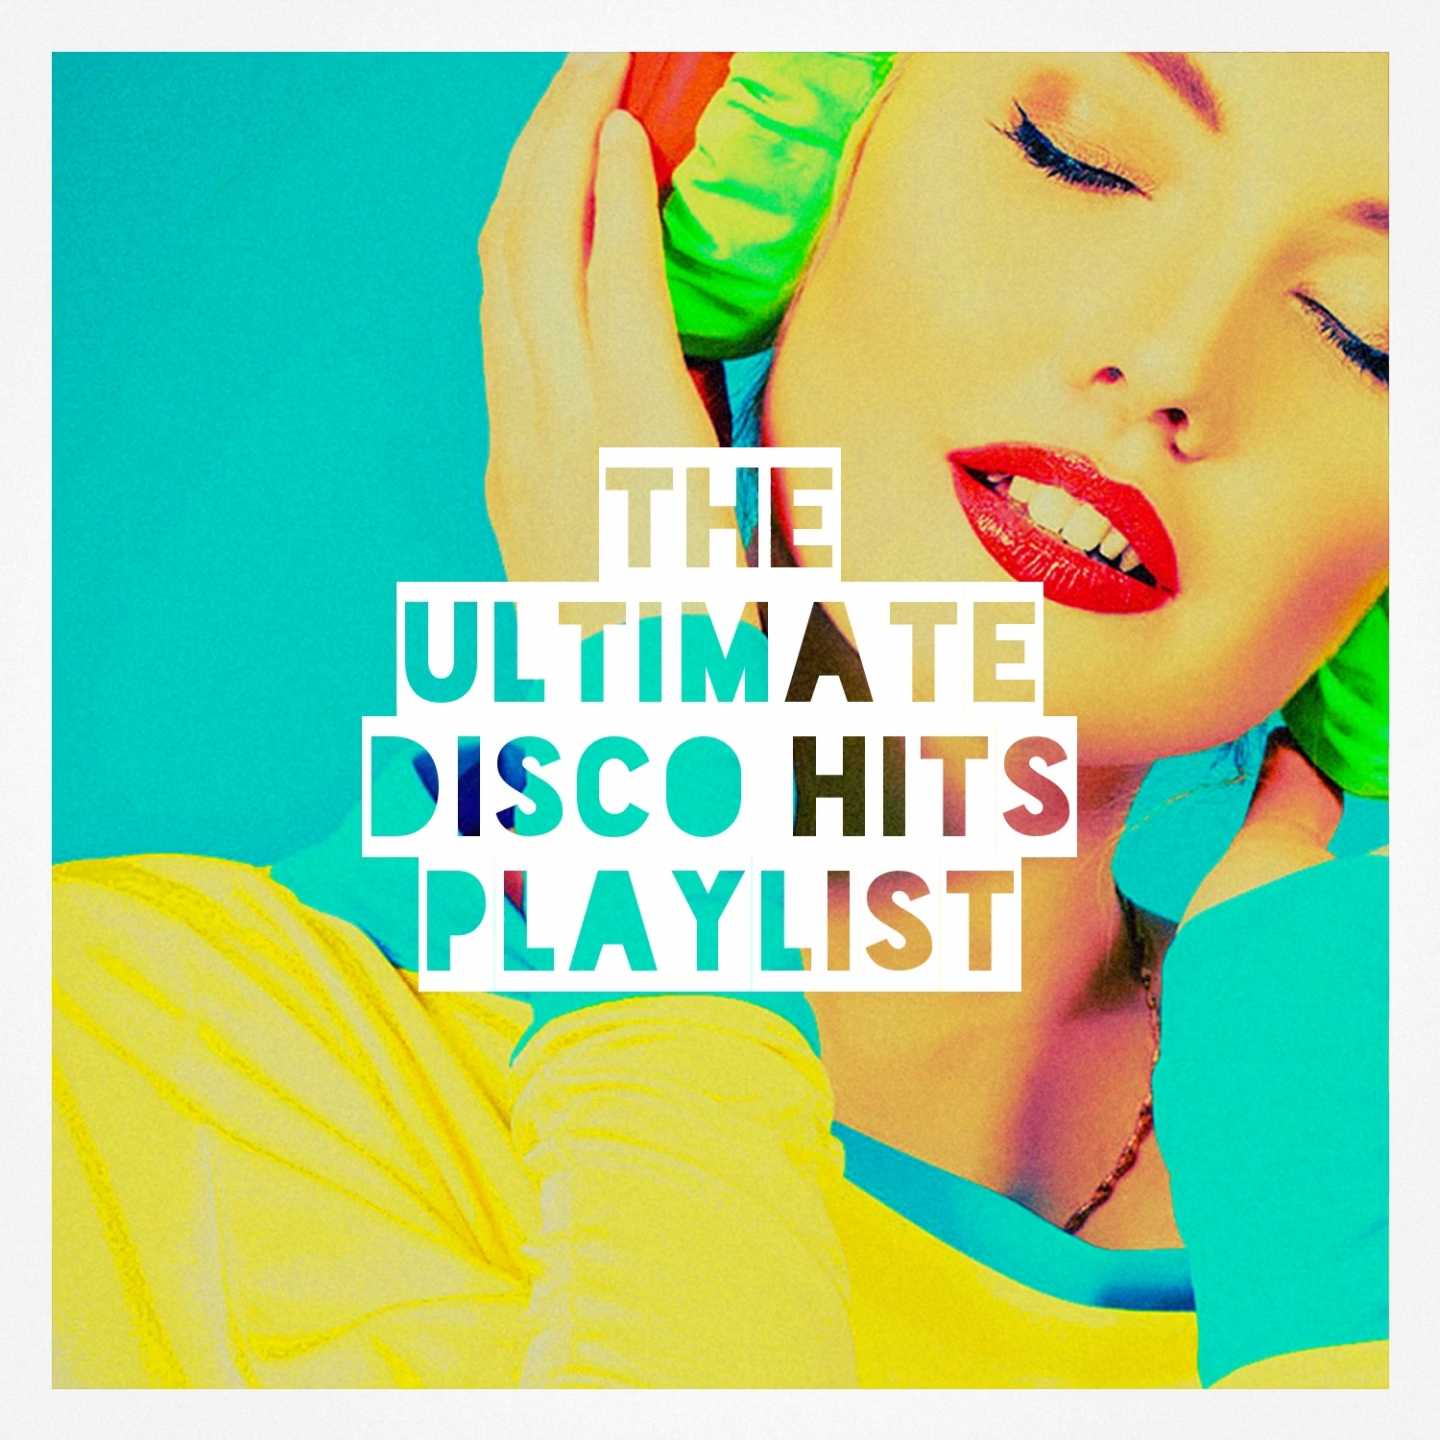 The Ultimate Disco Hits Playlist